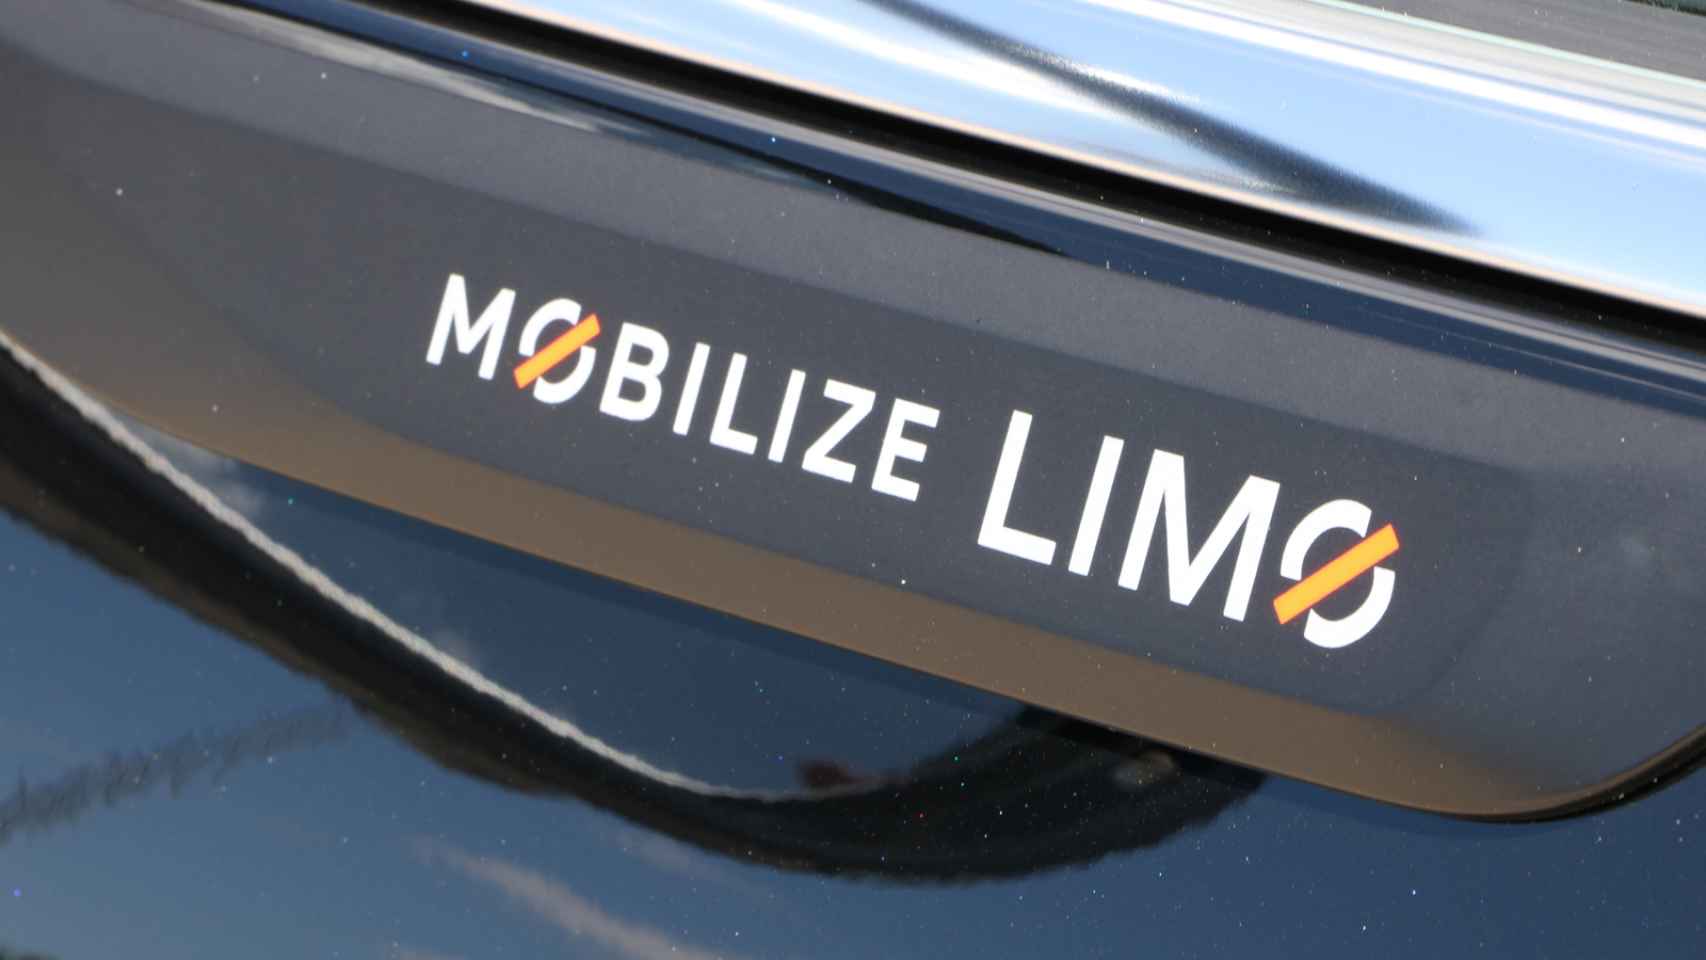 Mobilize Limo